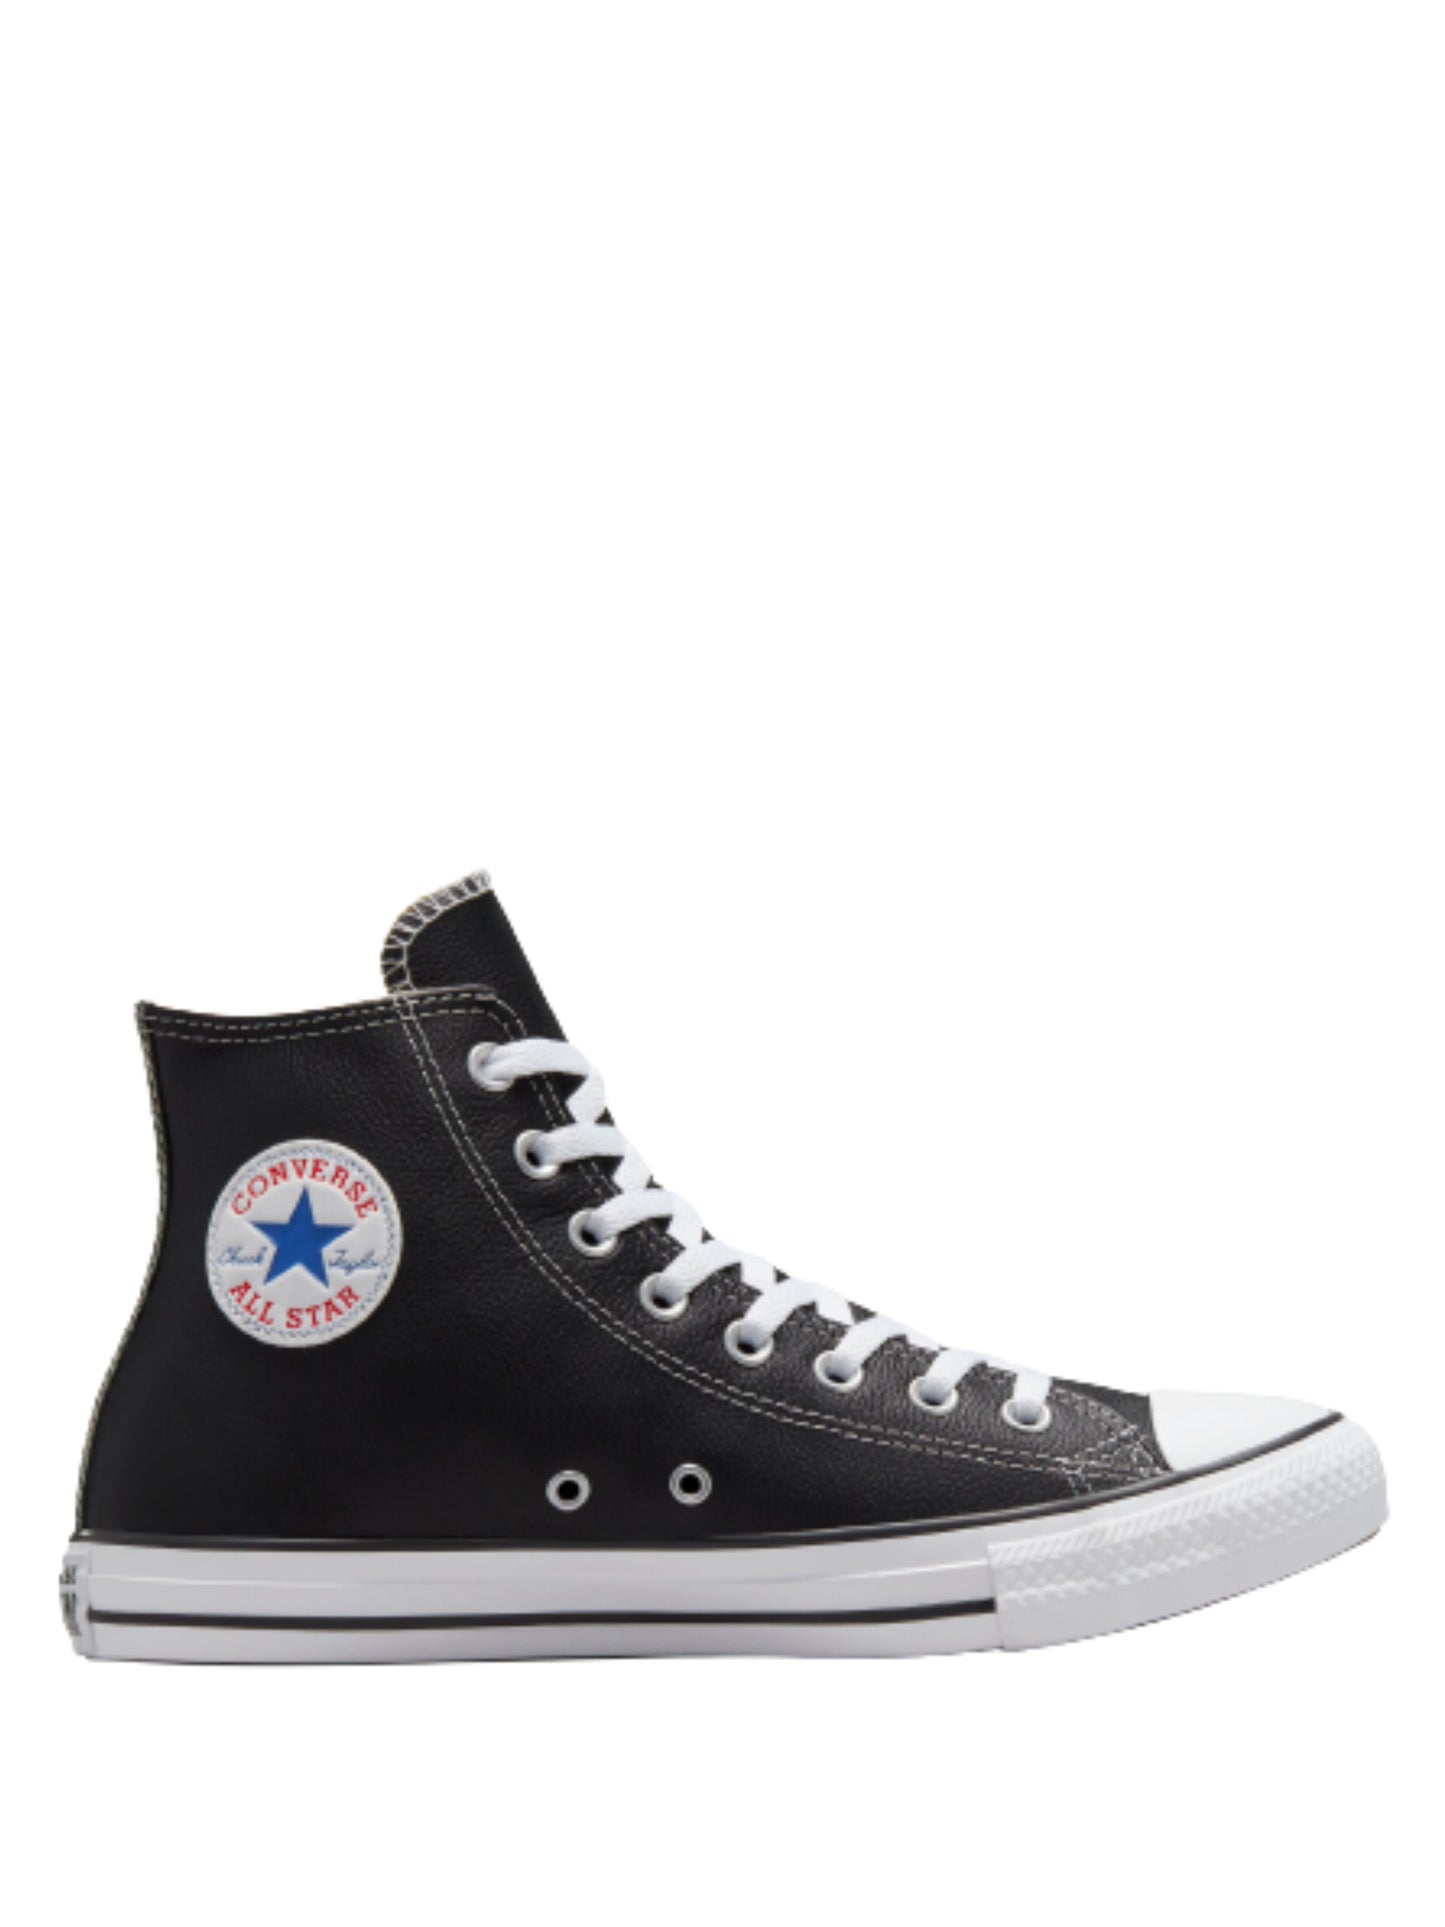 Converse All Star Leather Black/White (1:1 Batch)